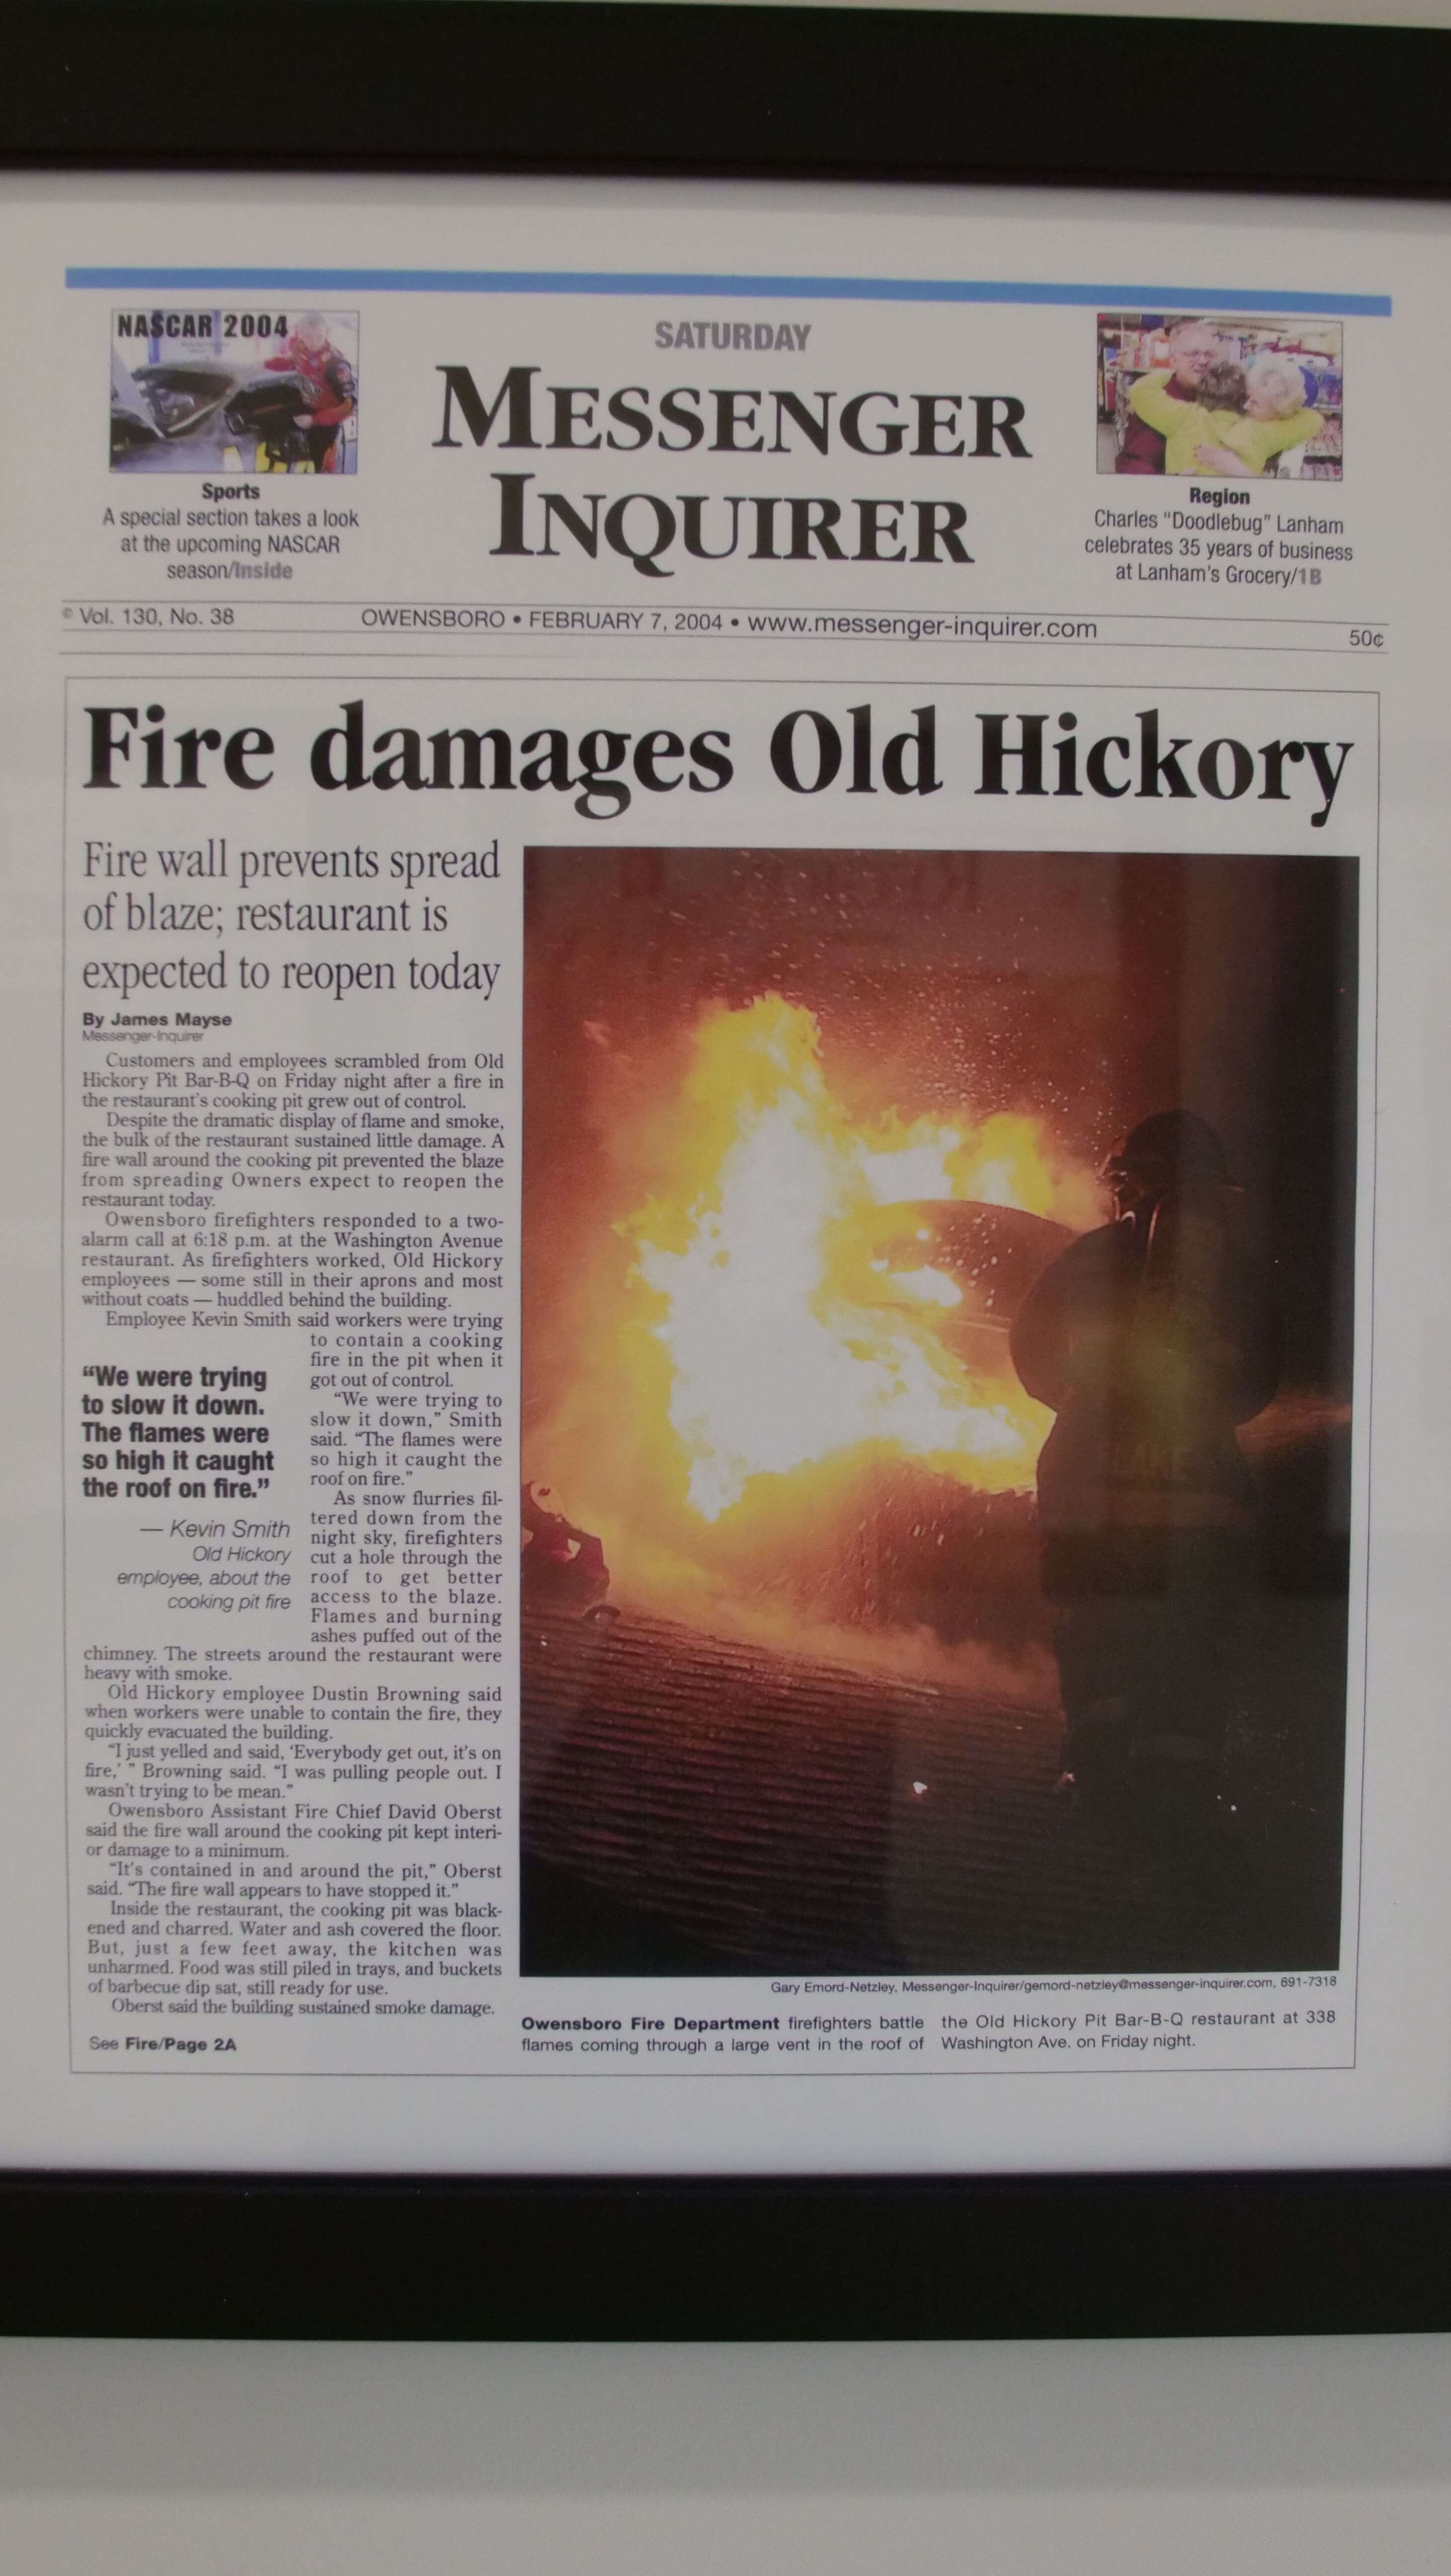 Newspaper showing Old Hickory fire damage